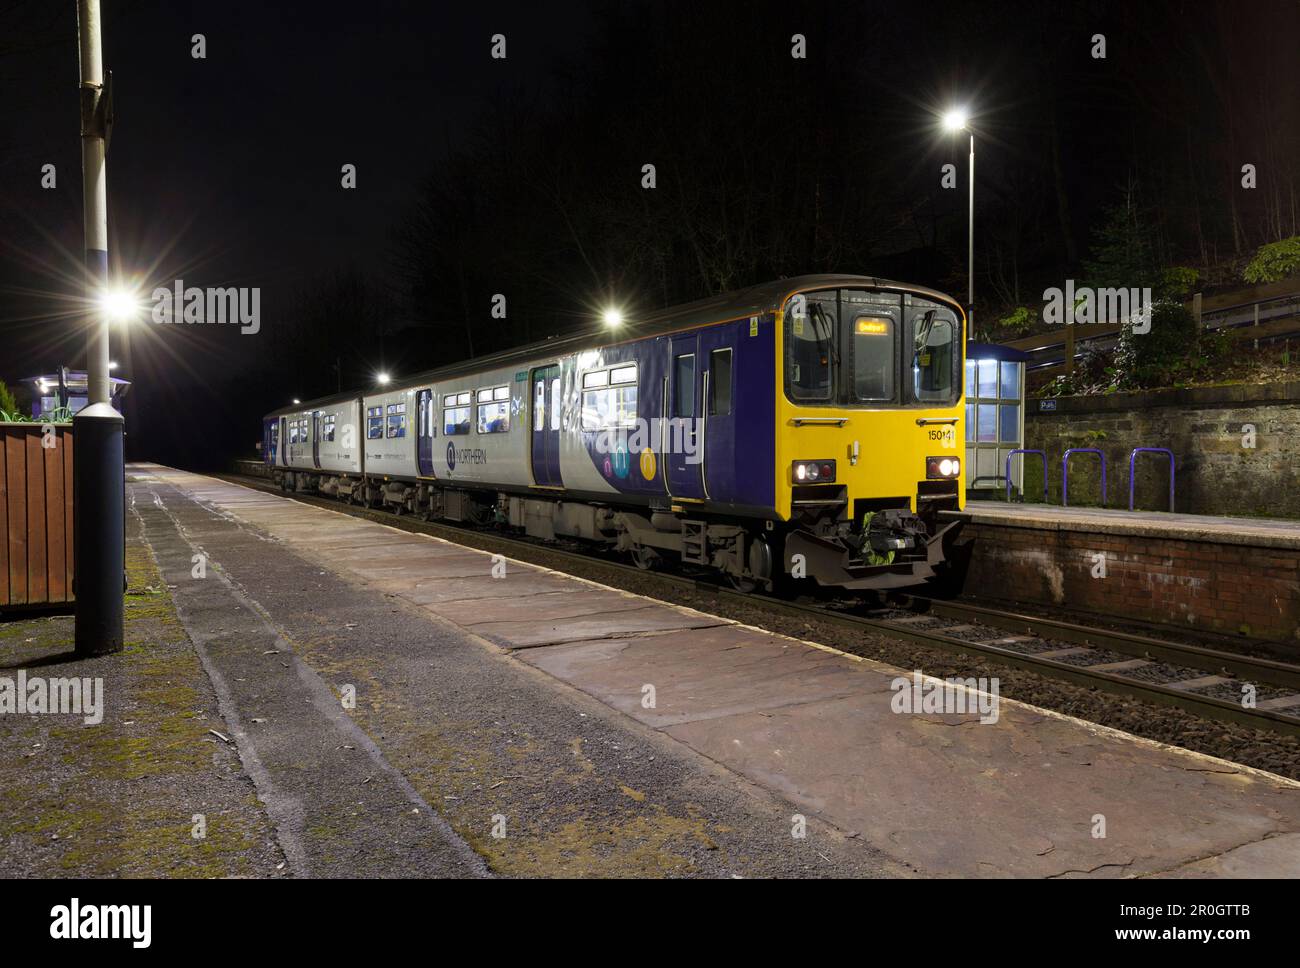 Northern Rail class 150 train 150141 calling at Westhoughton railway station on a dark night Stock Photo